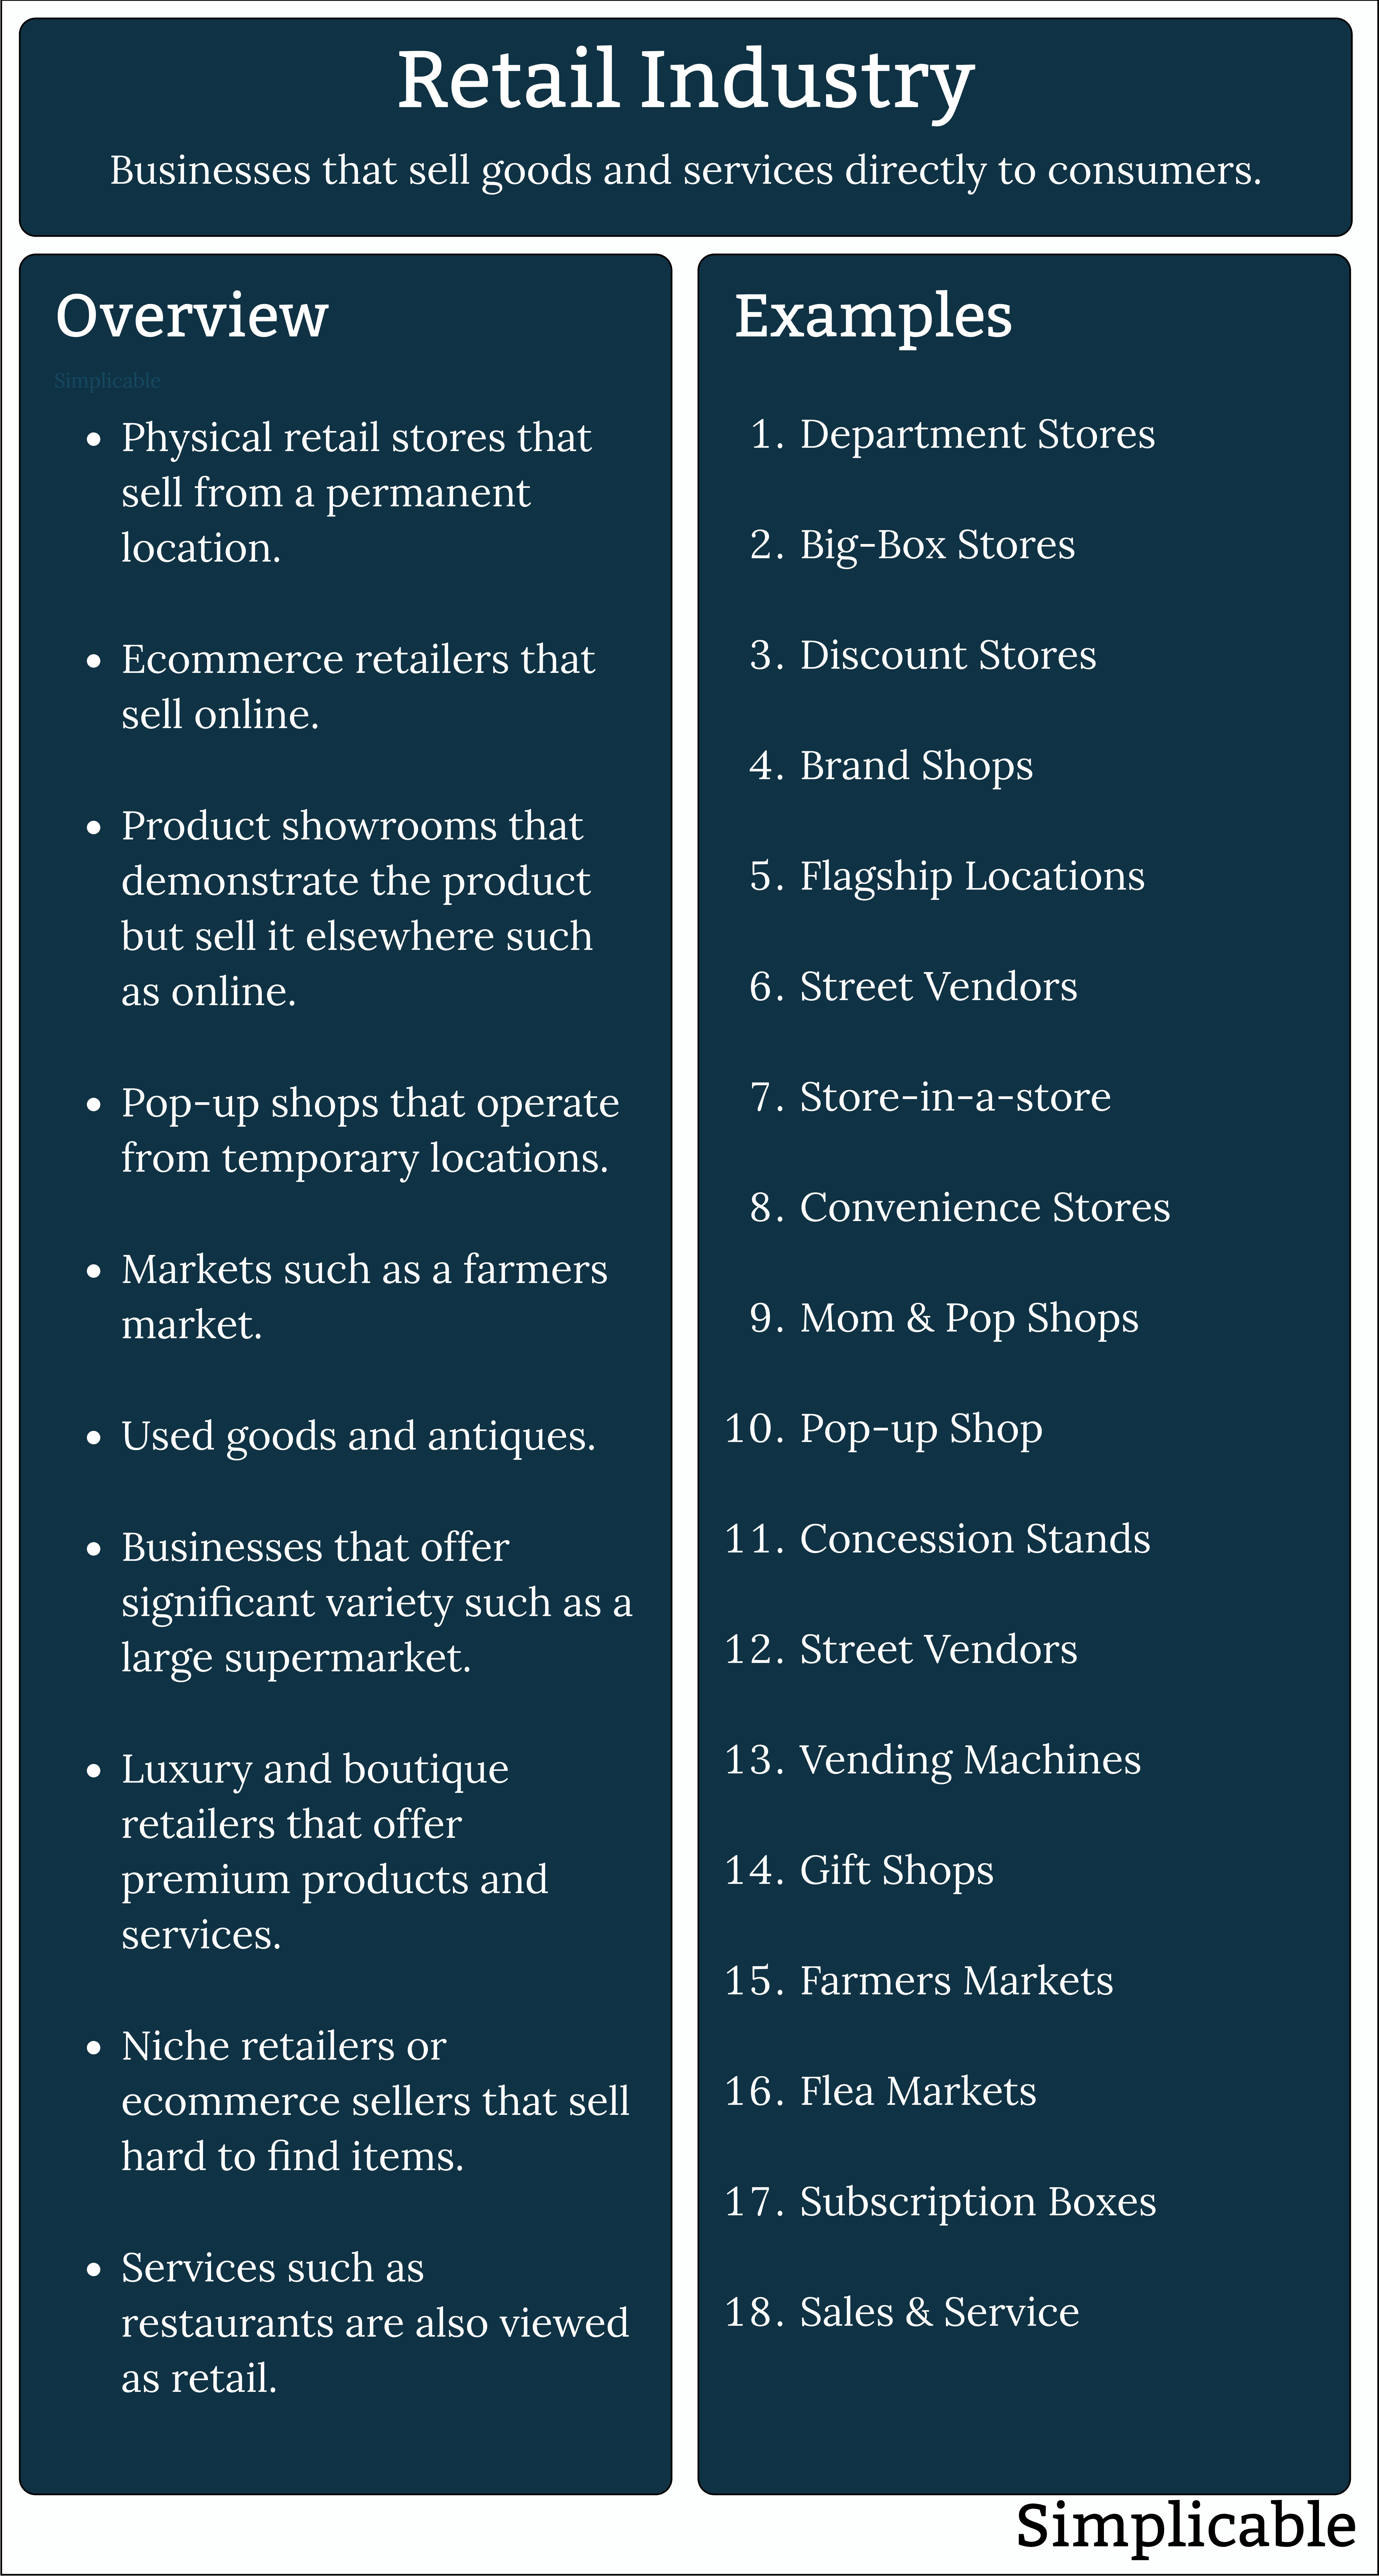 retail industry overview and examples